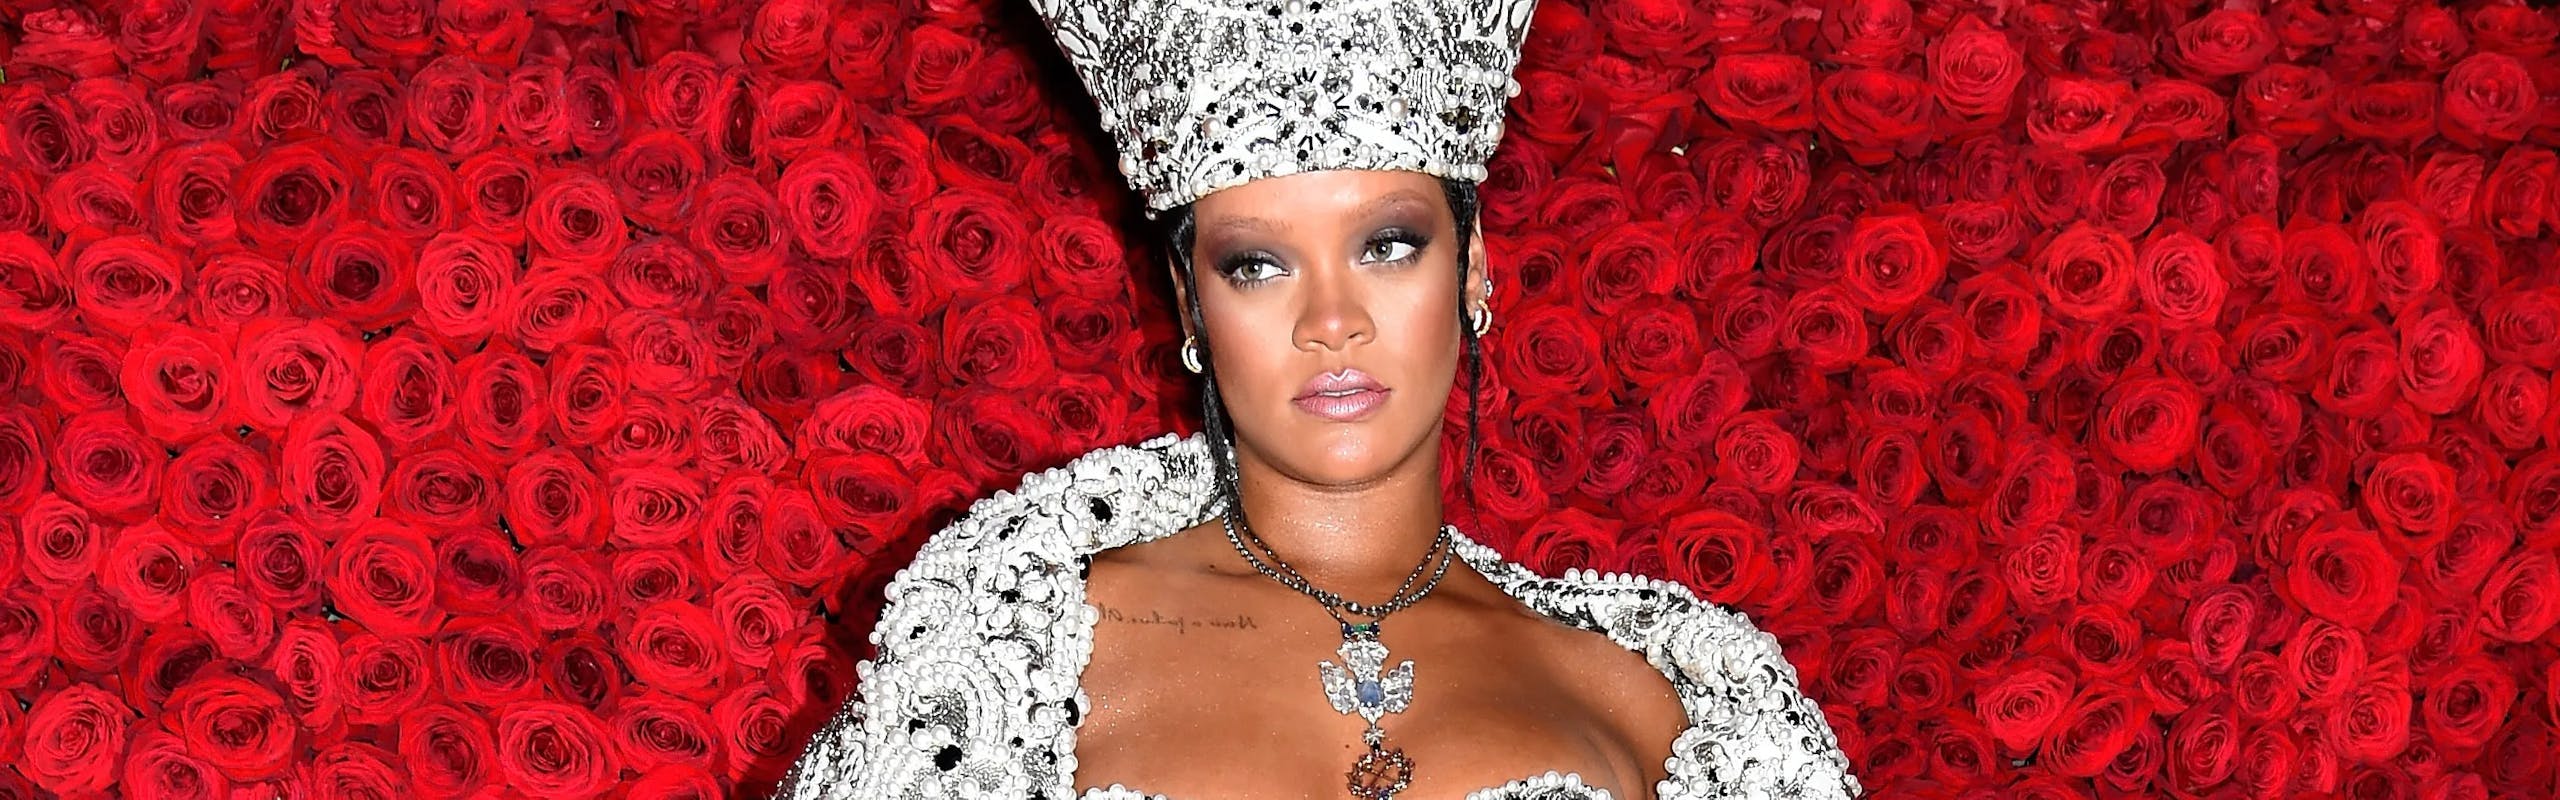 Rihanna wears dazziling Pope inspired gown to Met Gala